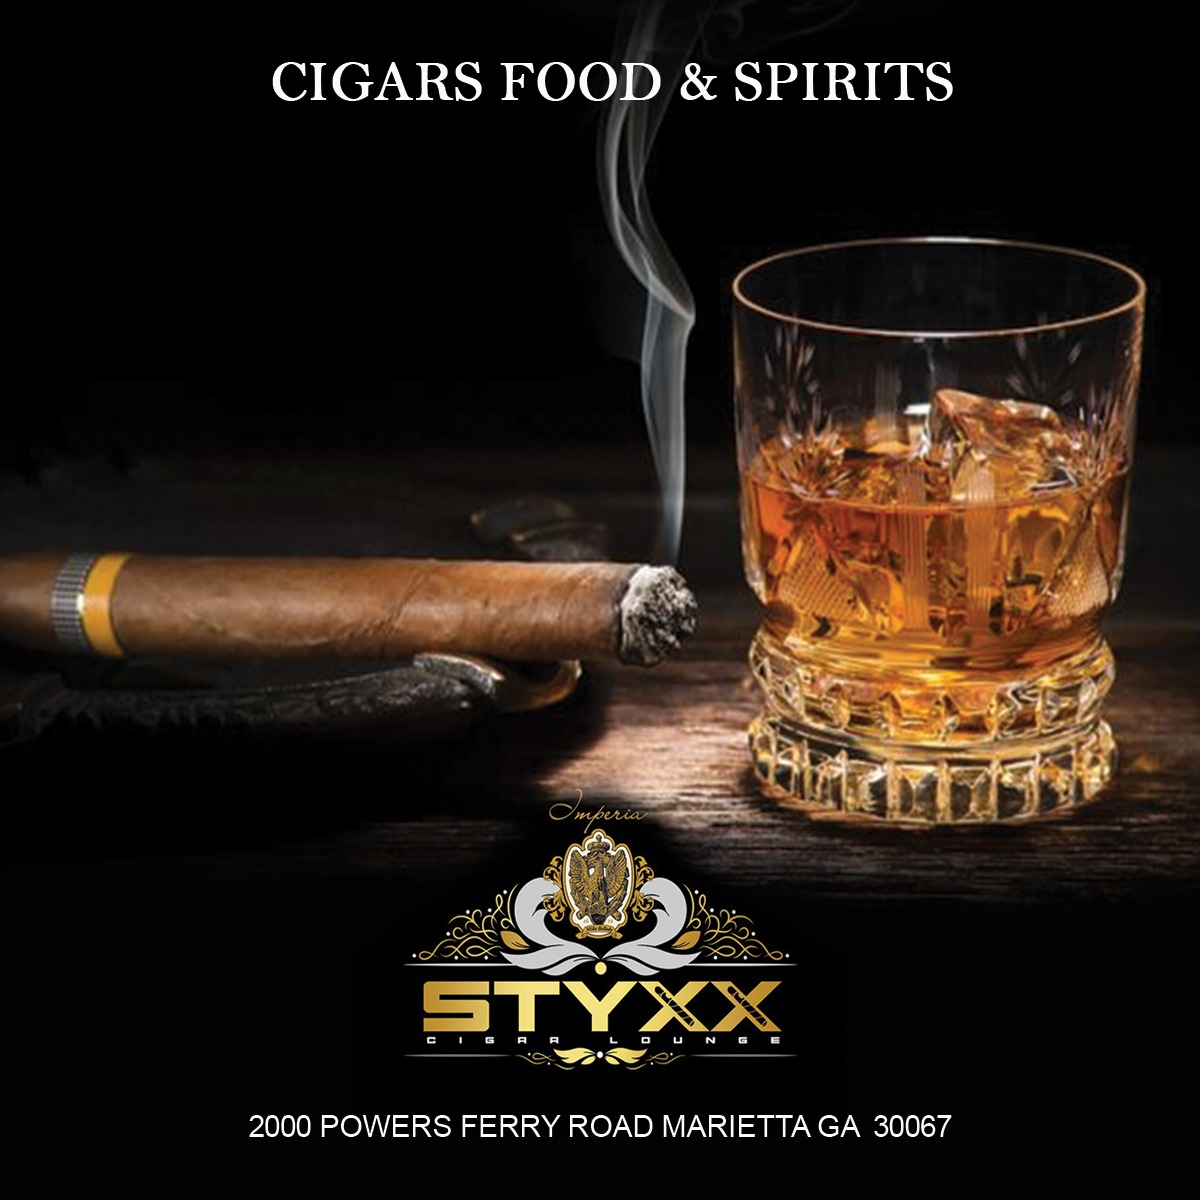 Cigars, dinner, Jazz and Sprits